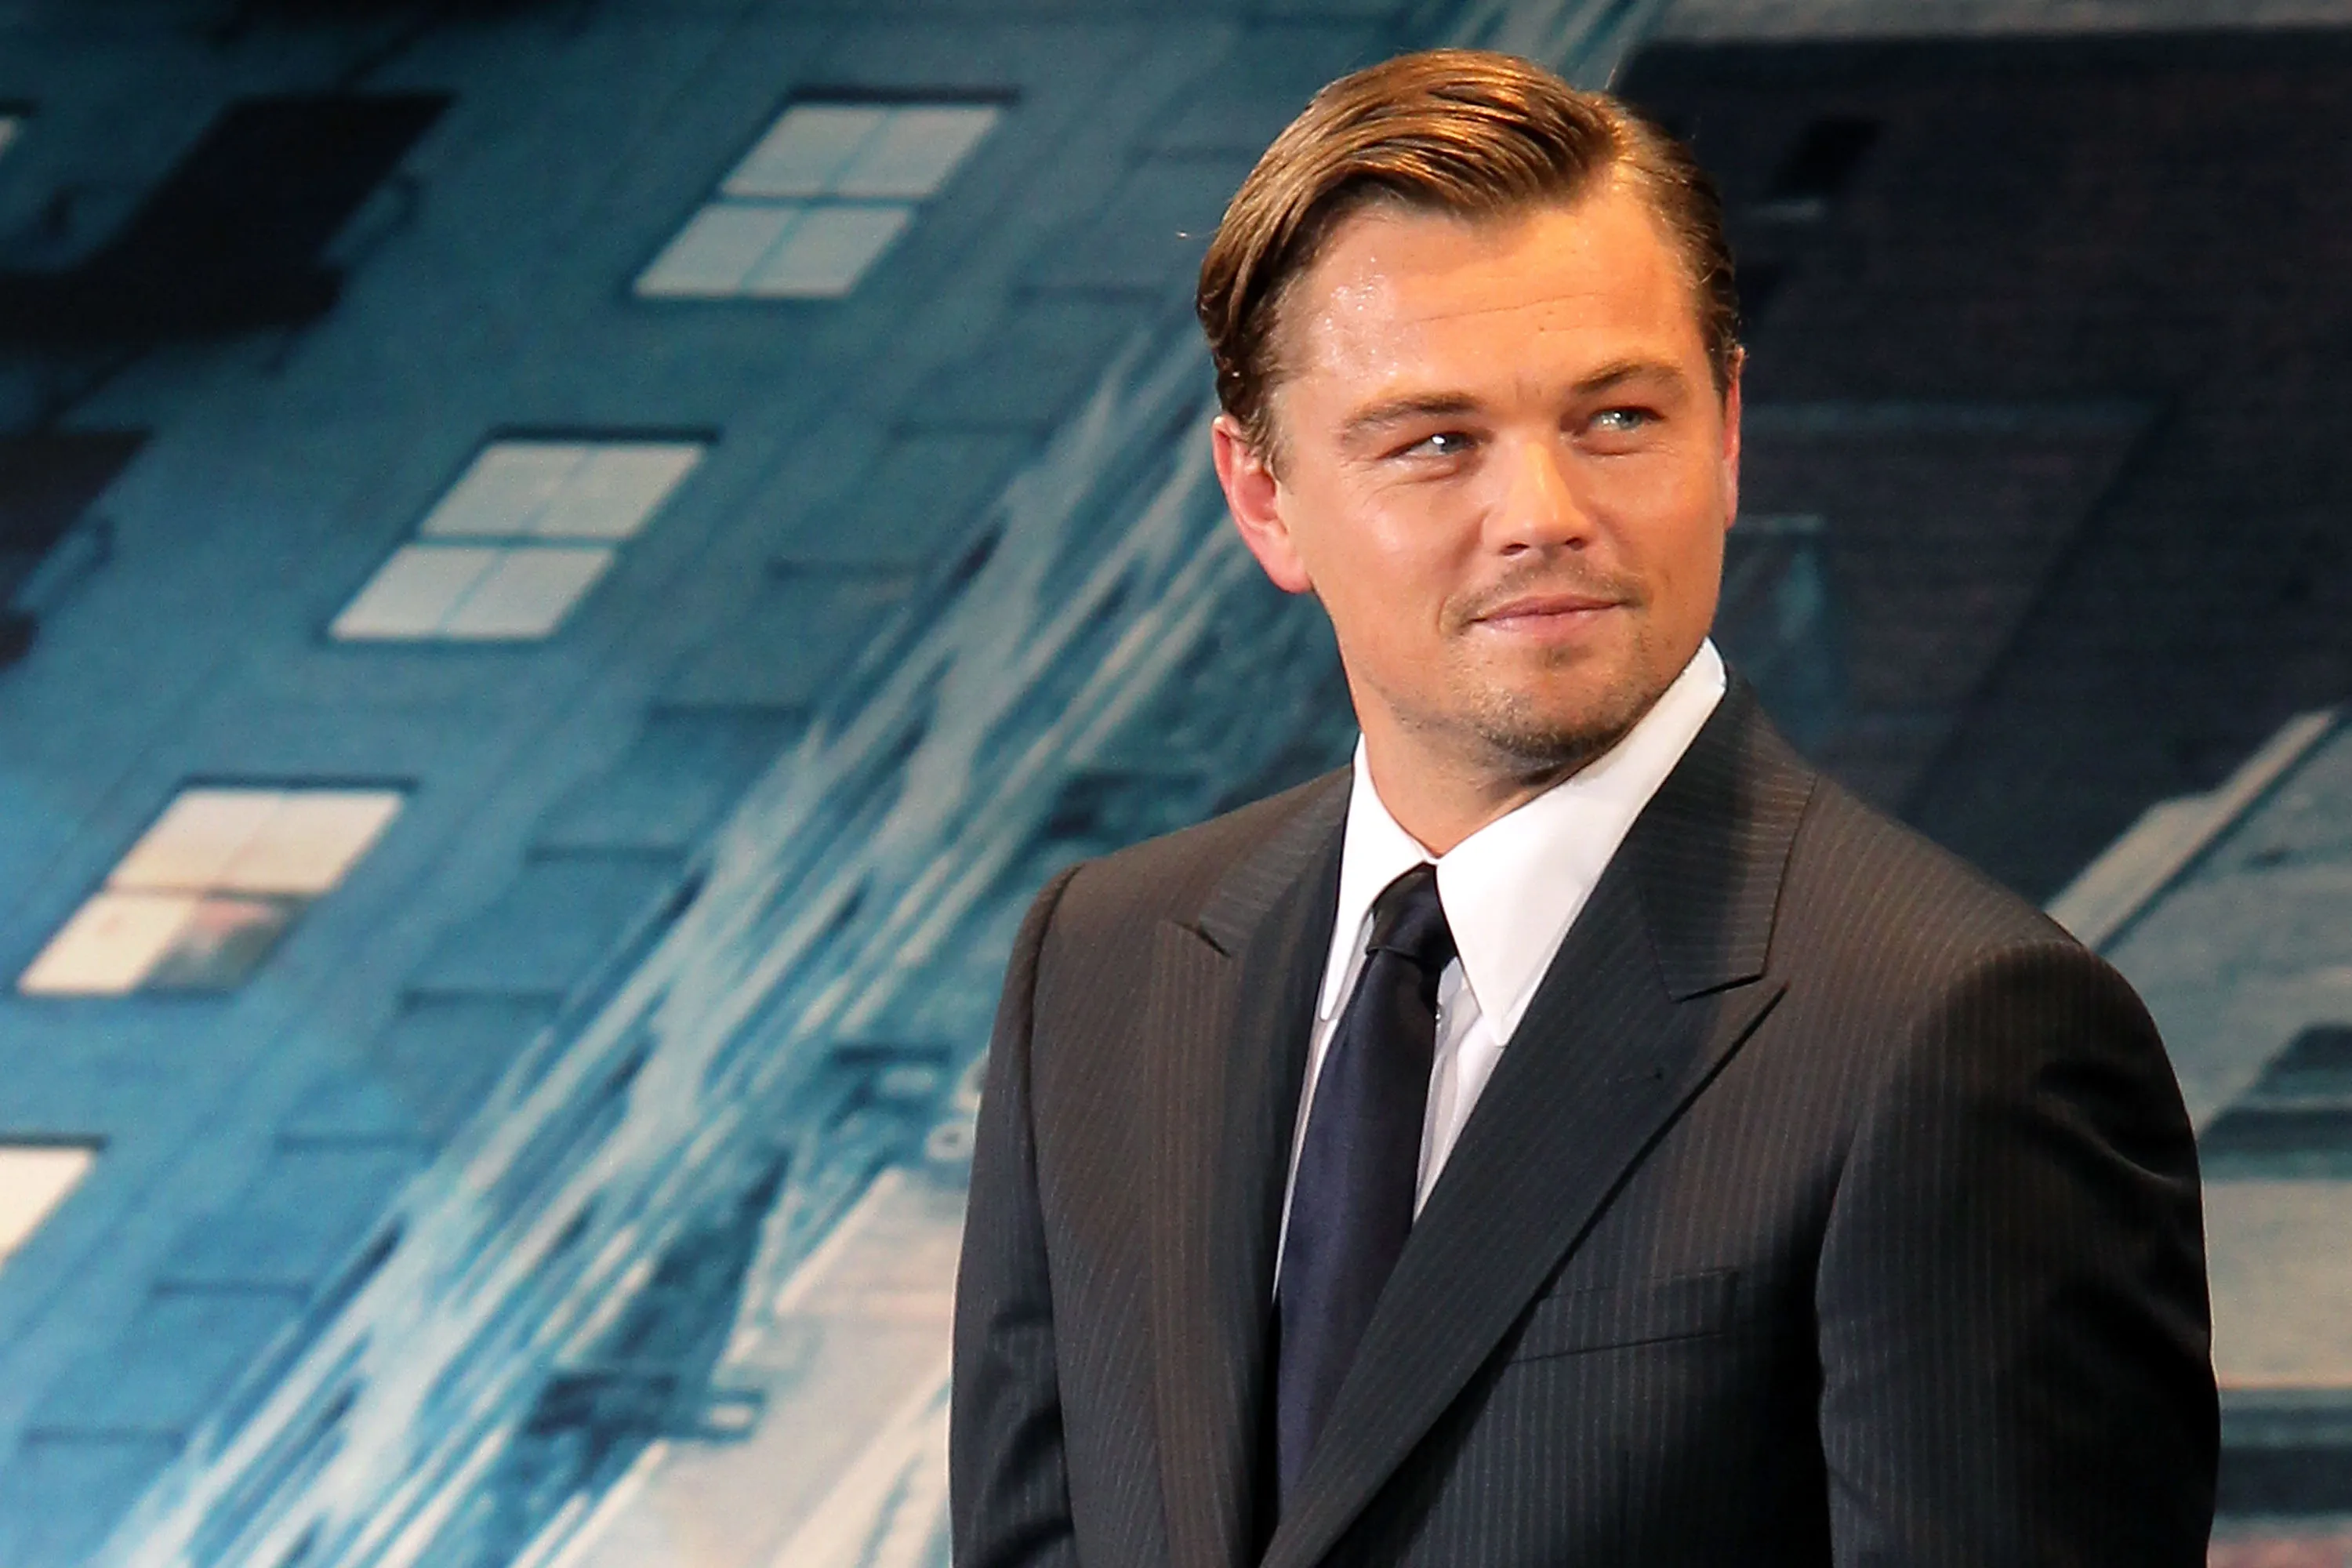 Which Leonardo DiCaprio film is based on a novel by F. Scott Fitzgerald?